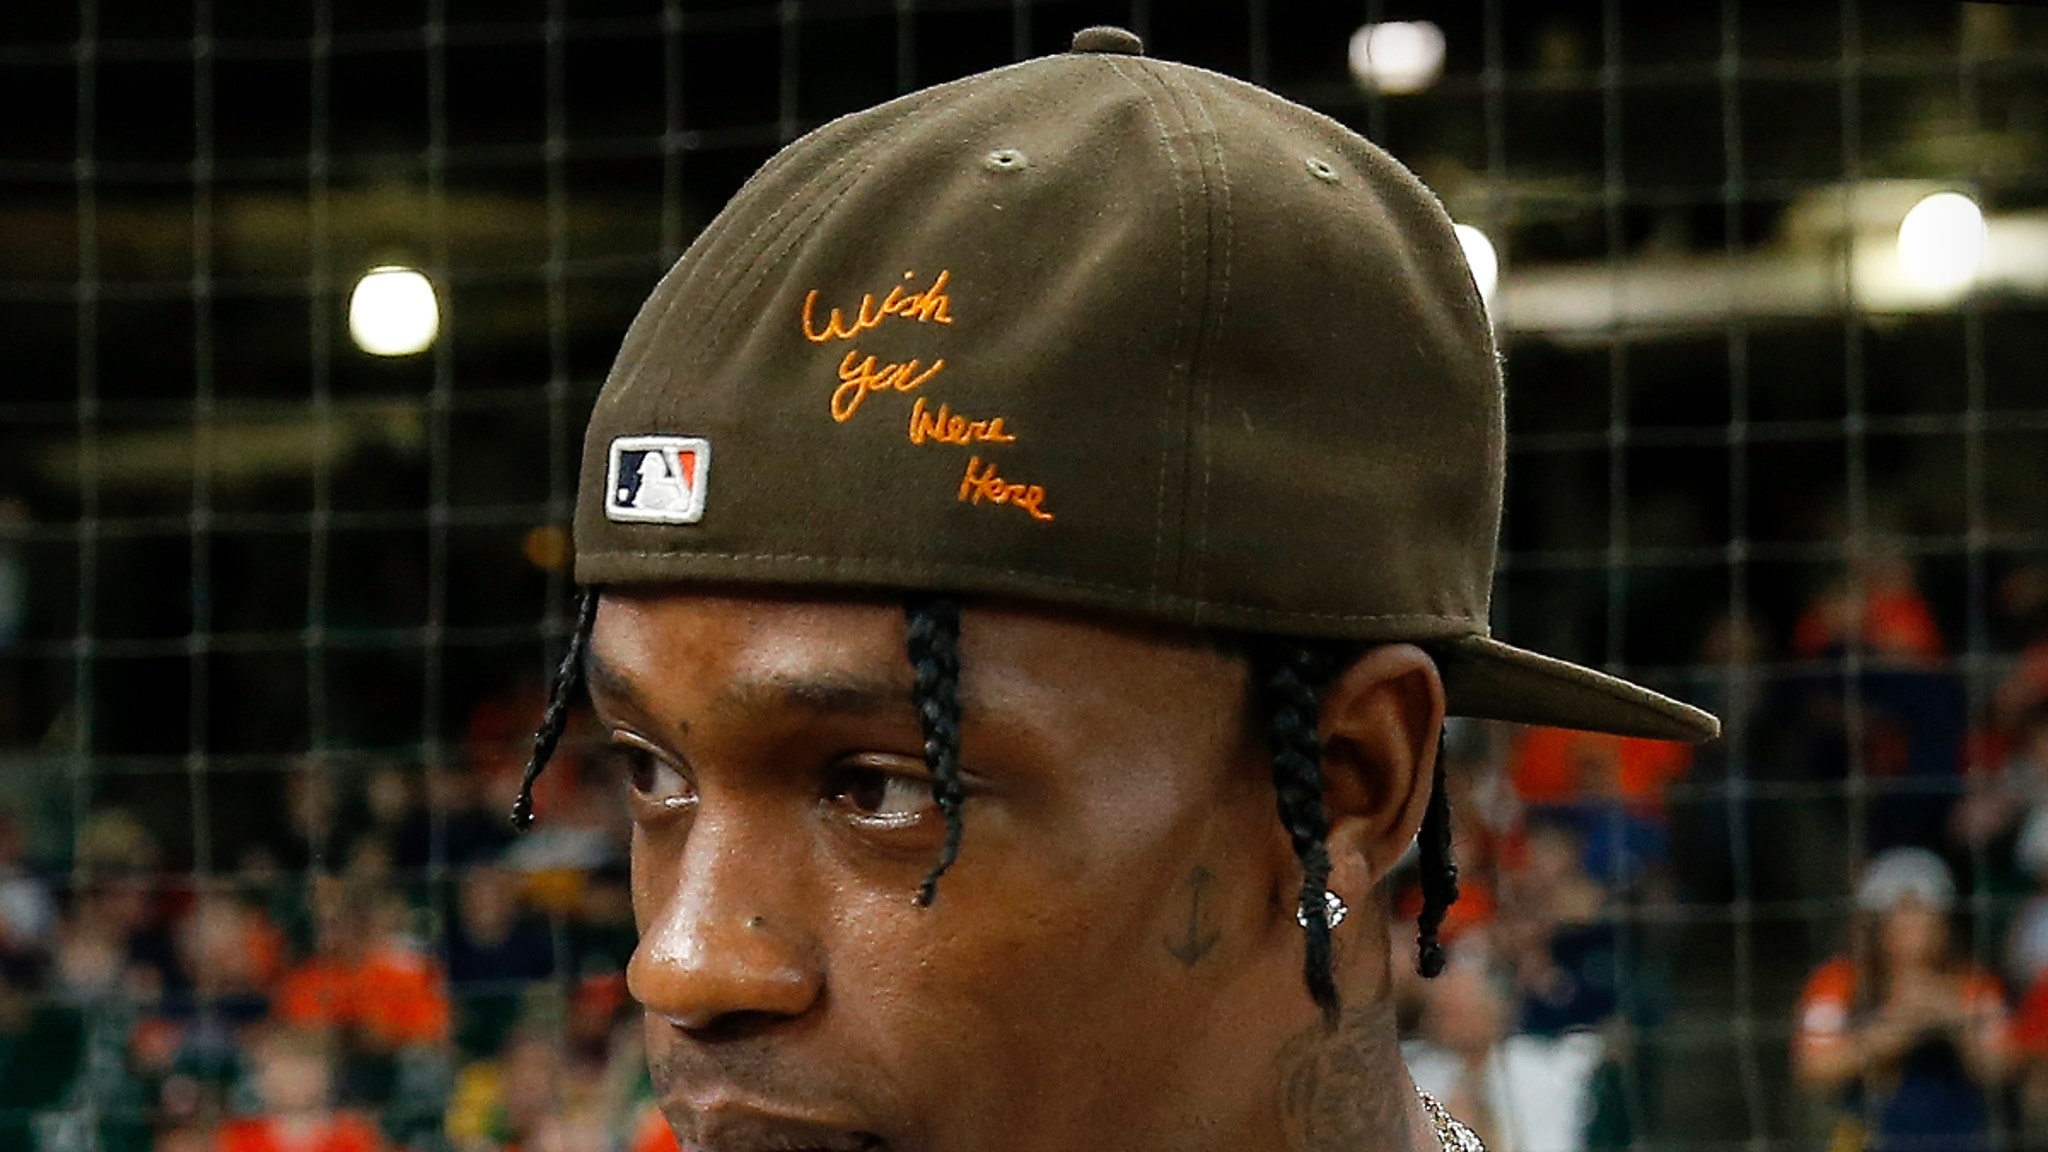 Travis Scott Went to Dave & Buster's After Astroworld Festival, Unaware of Tragedy